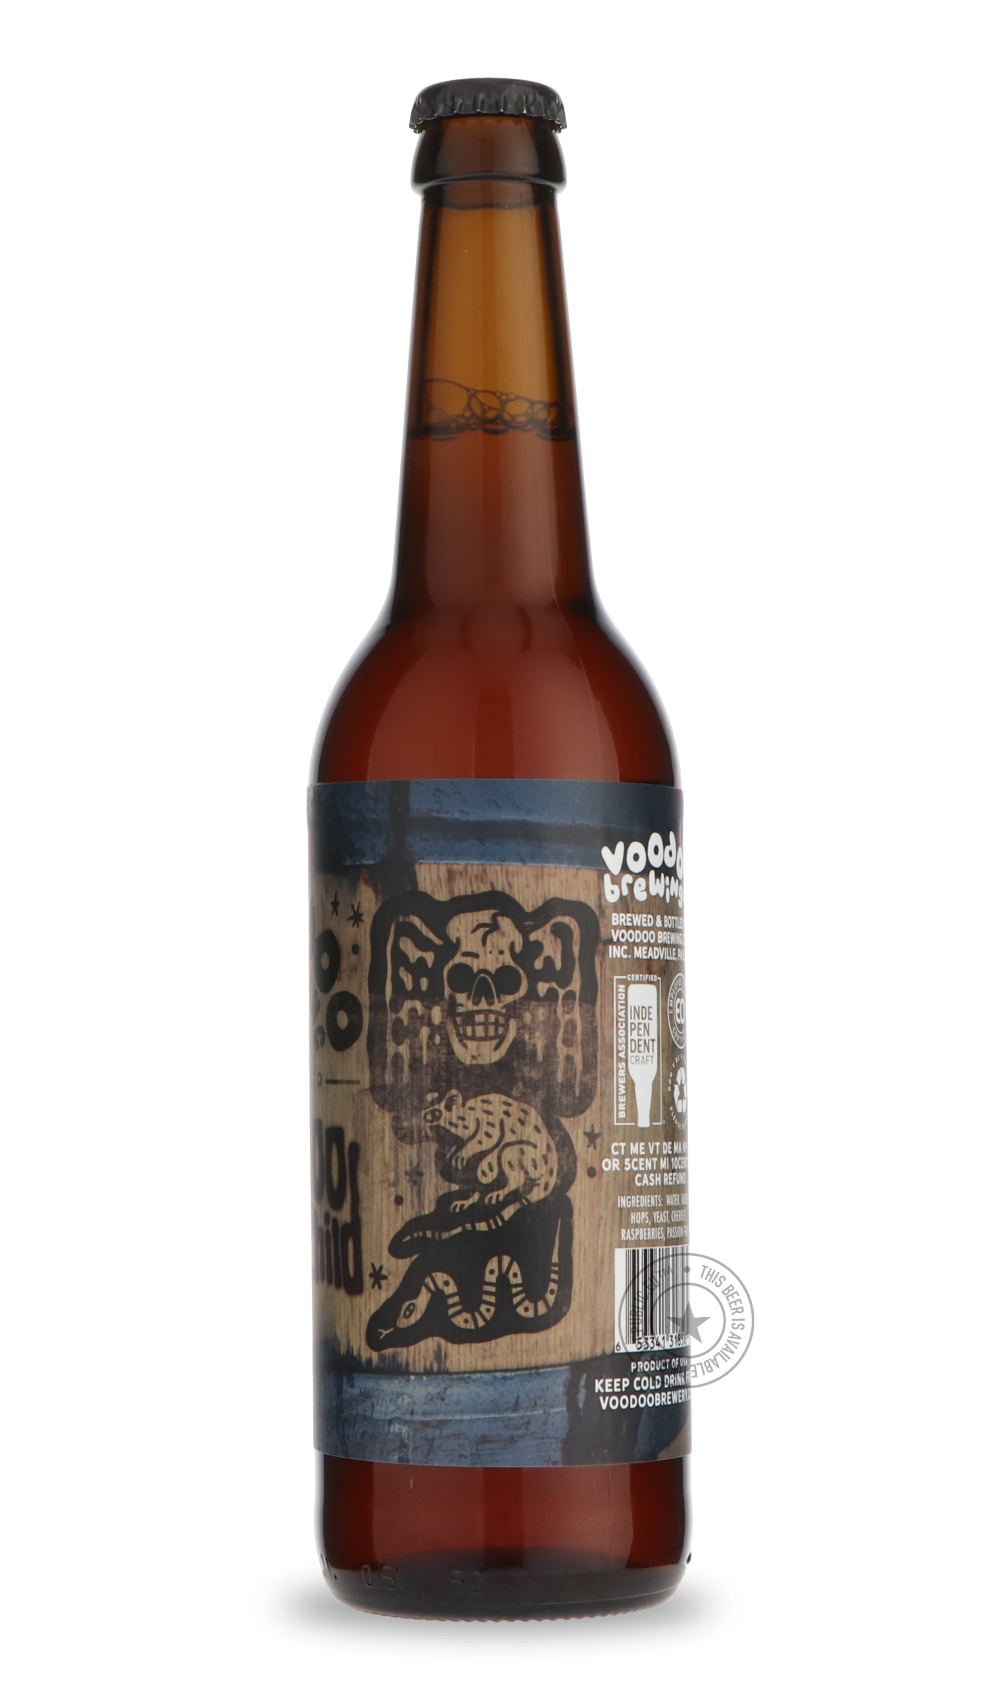 -Voodoo- Voodoo Love Child Aged in French Oak Malbec Barrels-Pale- Only @ Beer Republic - The best online beer store for American & Canadian craft beer - Buy beer online from the USA and Canada - Bier online kopen - Amerikaans bier kopen - Craft beer store - Craft beer kopen - Amerikanisch bier kaufen - Bier online kaufen - Acheter biere online - IPA - Stout - Porter - New England IPA - Hazy IPA - Imperial Stout - Barrel Aged - Barrel Aged Imperial Stout - Brown - Dark beer - Blond - Blonde - Pilsner - Lage